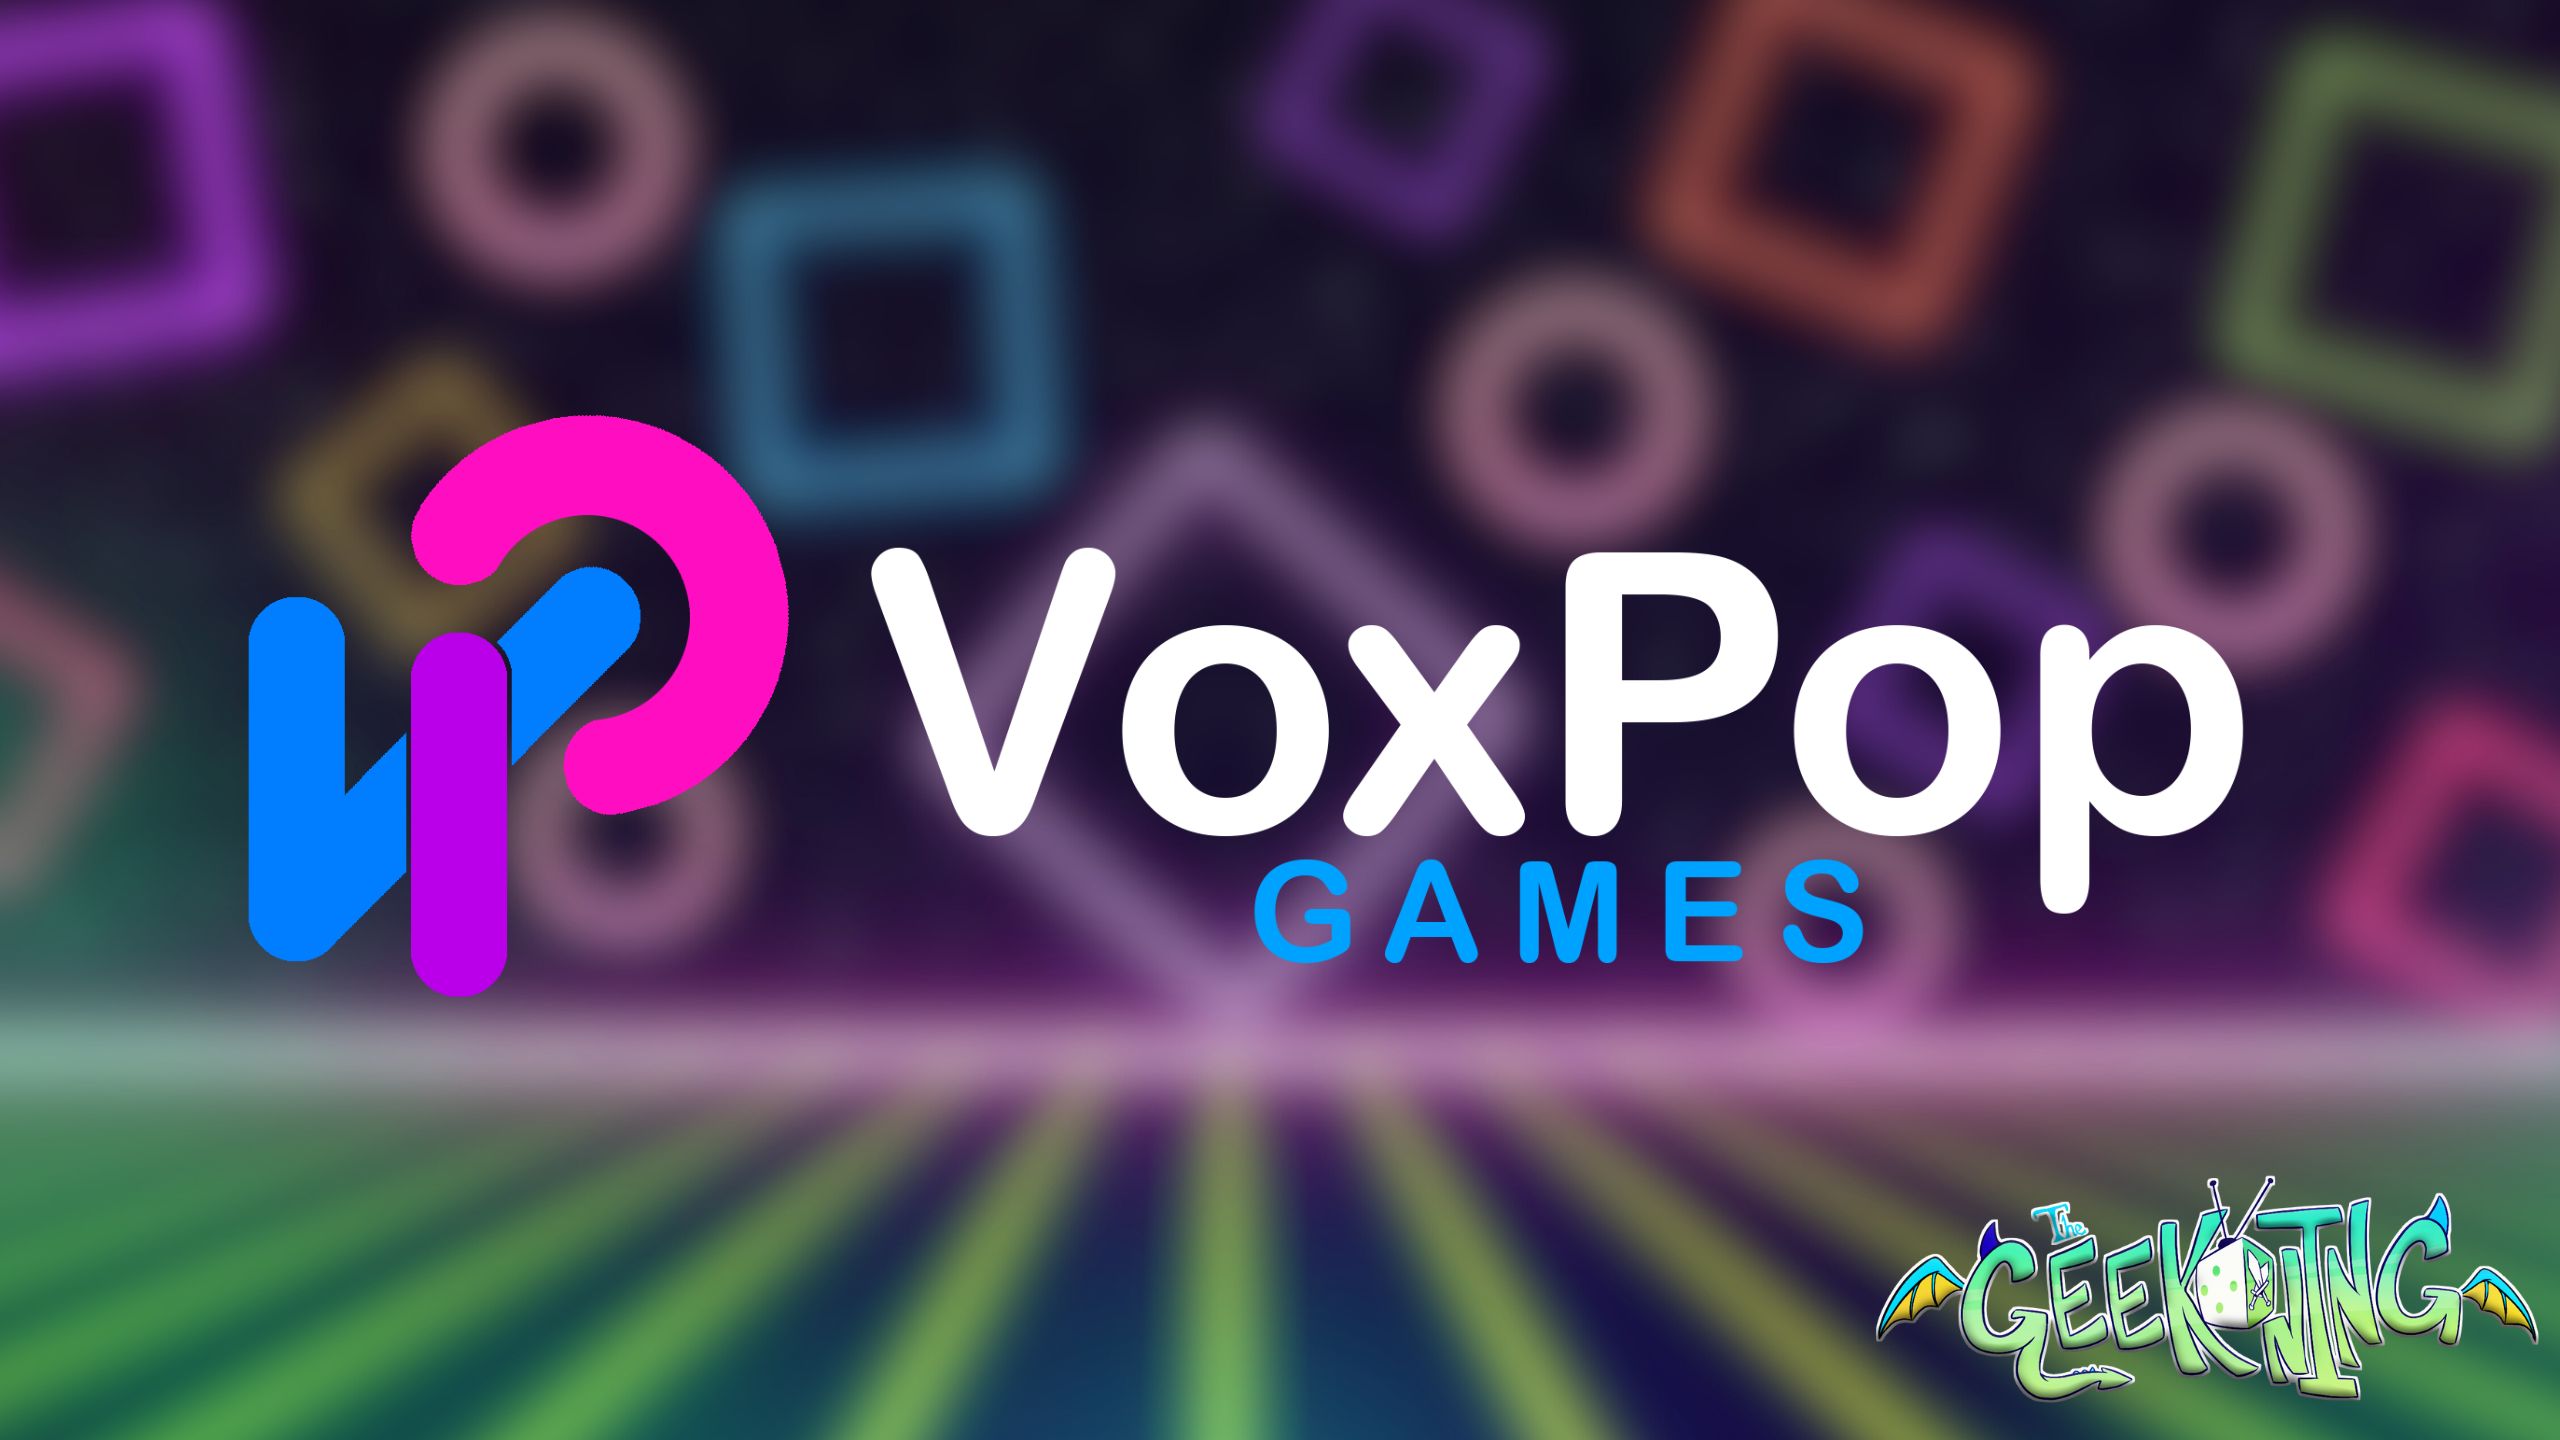 VoxPop Continues To Break Barriers In Indie Game Funding, Distro, and Community Building – Teams Up with GamerSky, MOME, and more! | The Geekoning Podcast